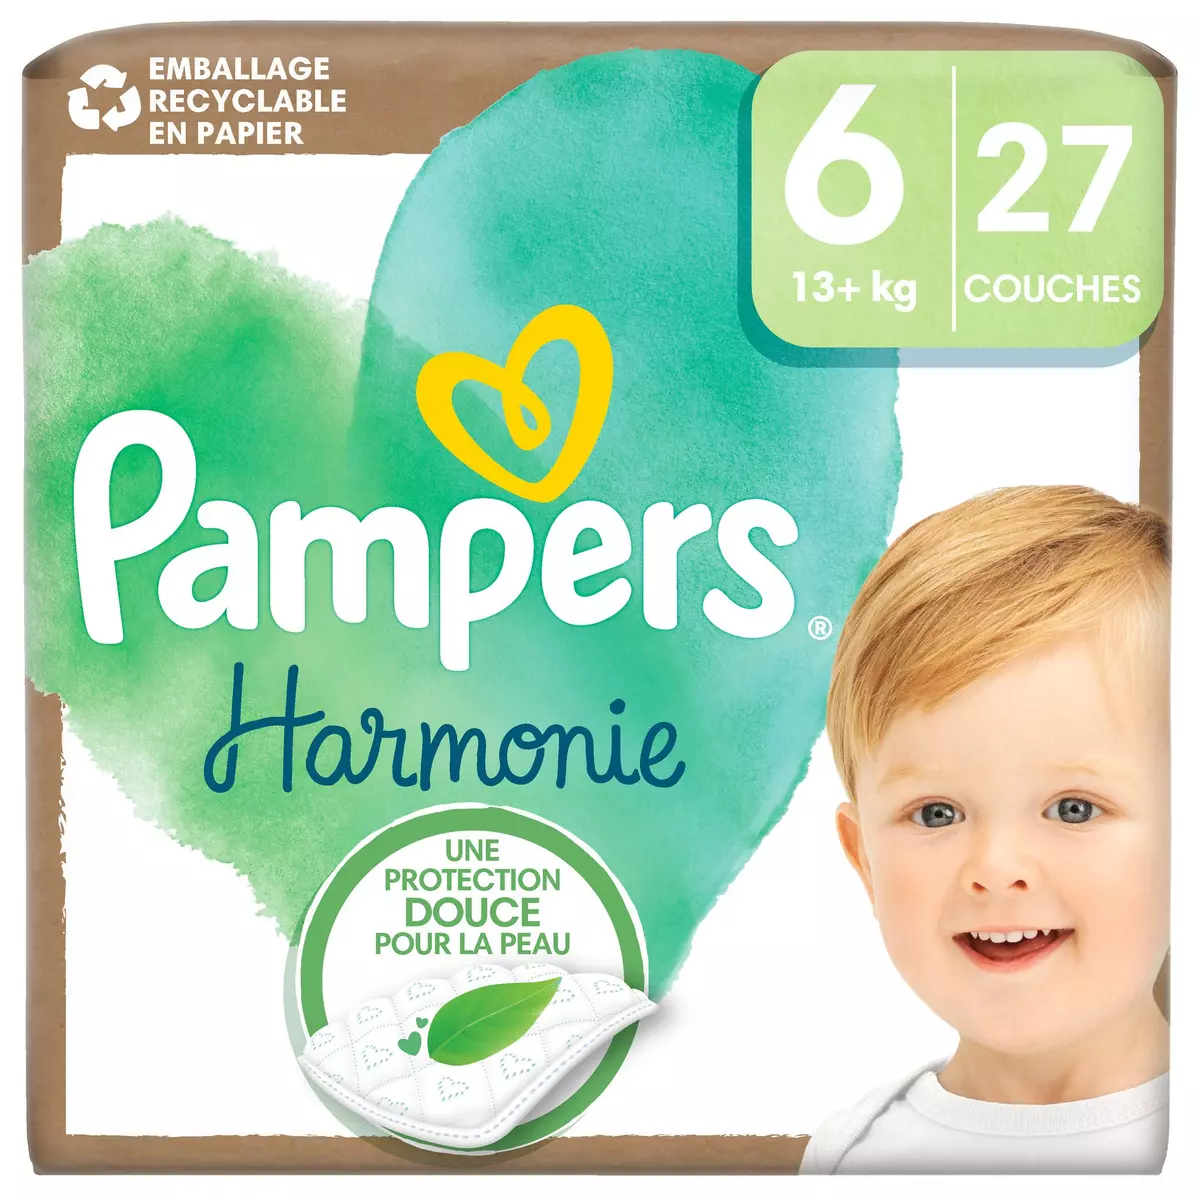 PAMPERS Harmonie couches taille 6 (+13kg) 27 couches